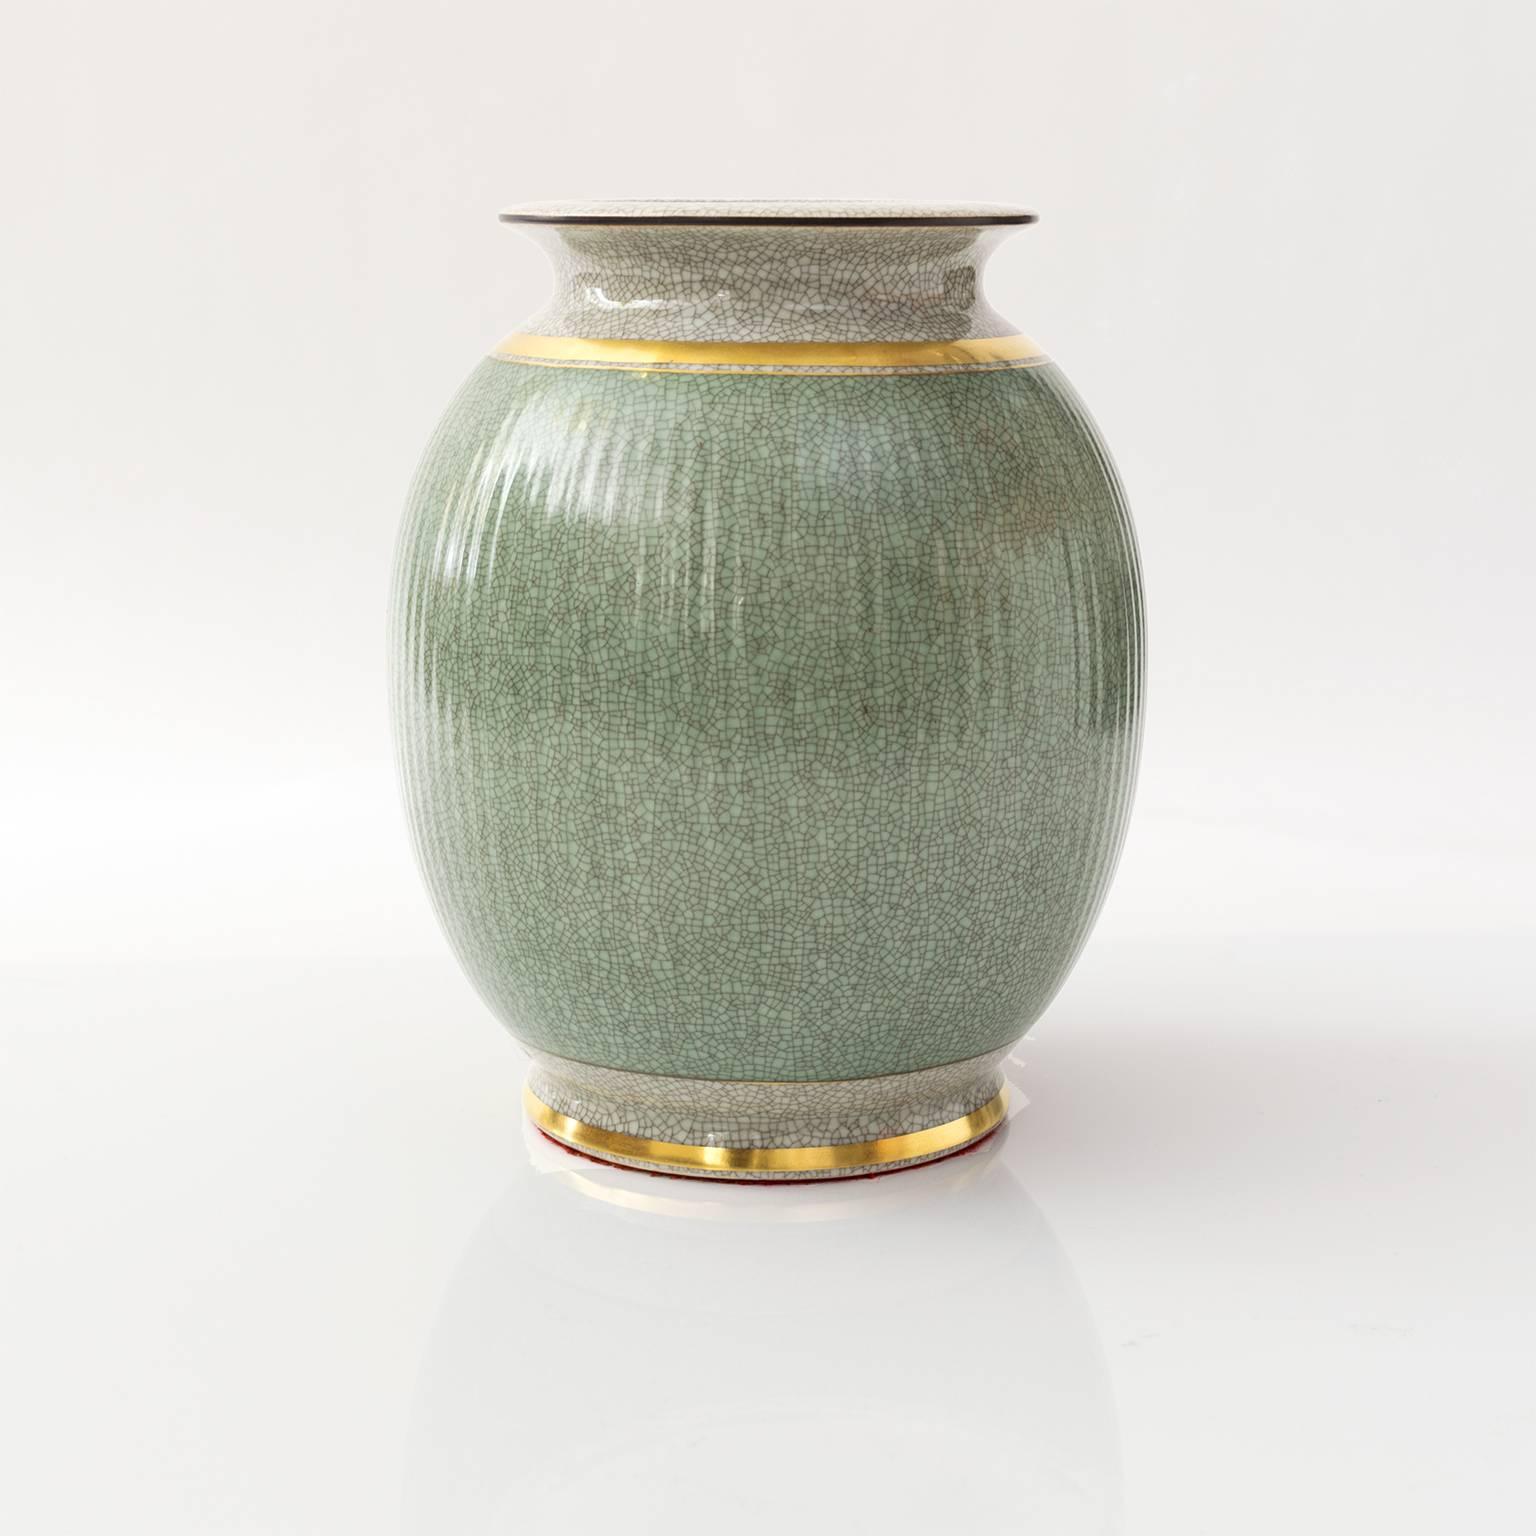 Scandinavian modern large Royal Copenhagen ceramic vase in green and white (craquelure) crackle glaze and detailed in gold. Made in Denmark, circa 1940s.
 
Measures: Height 9.75